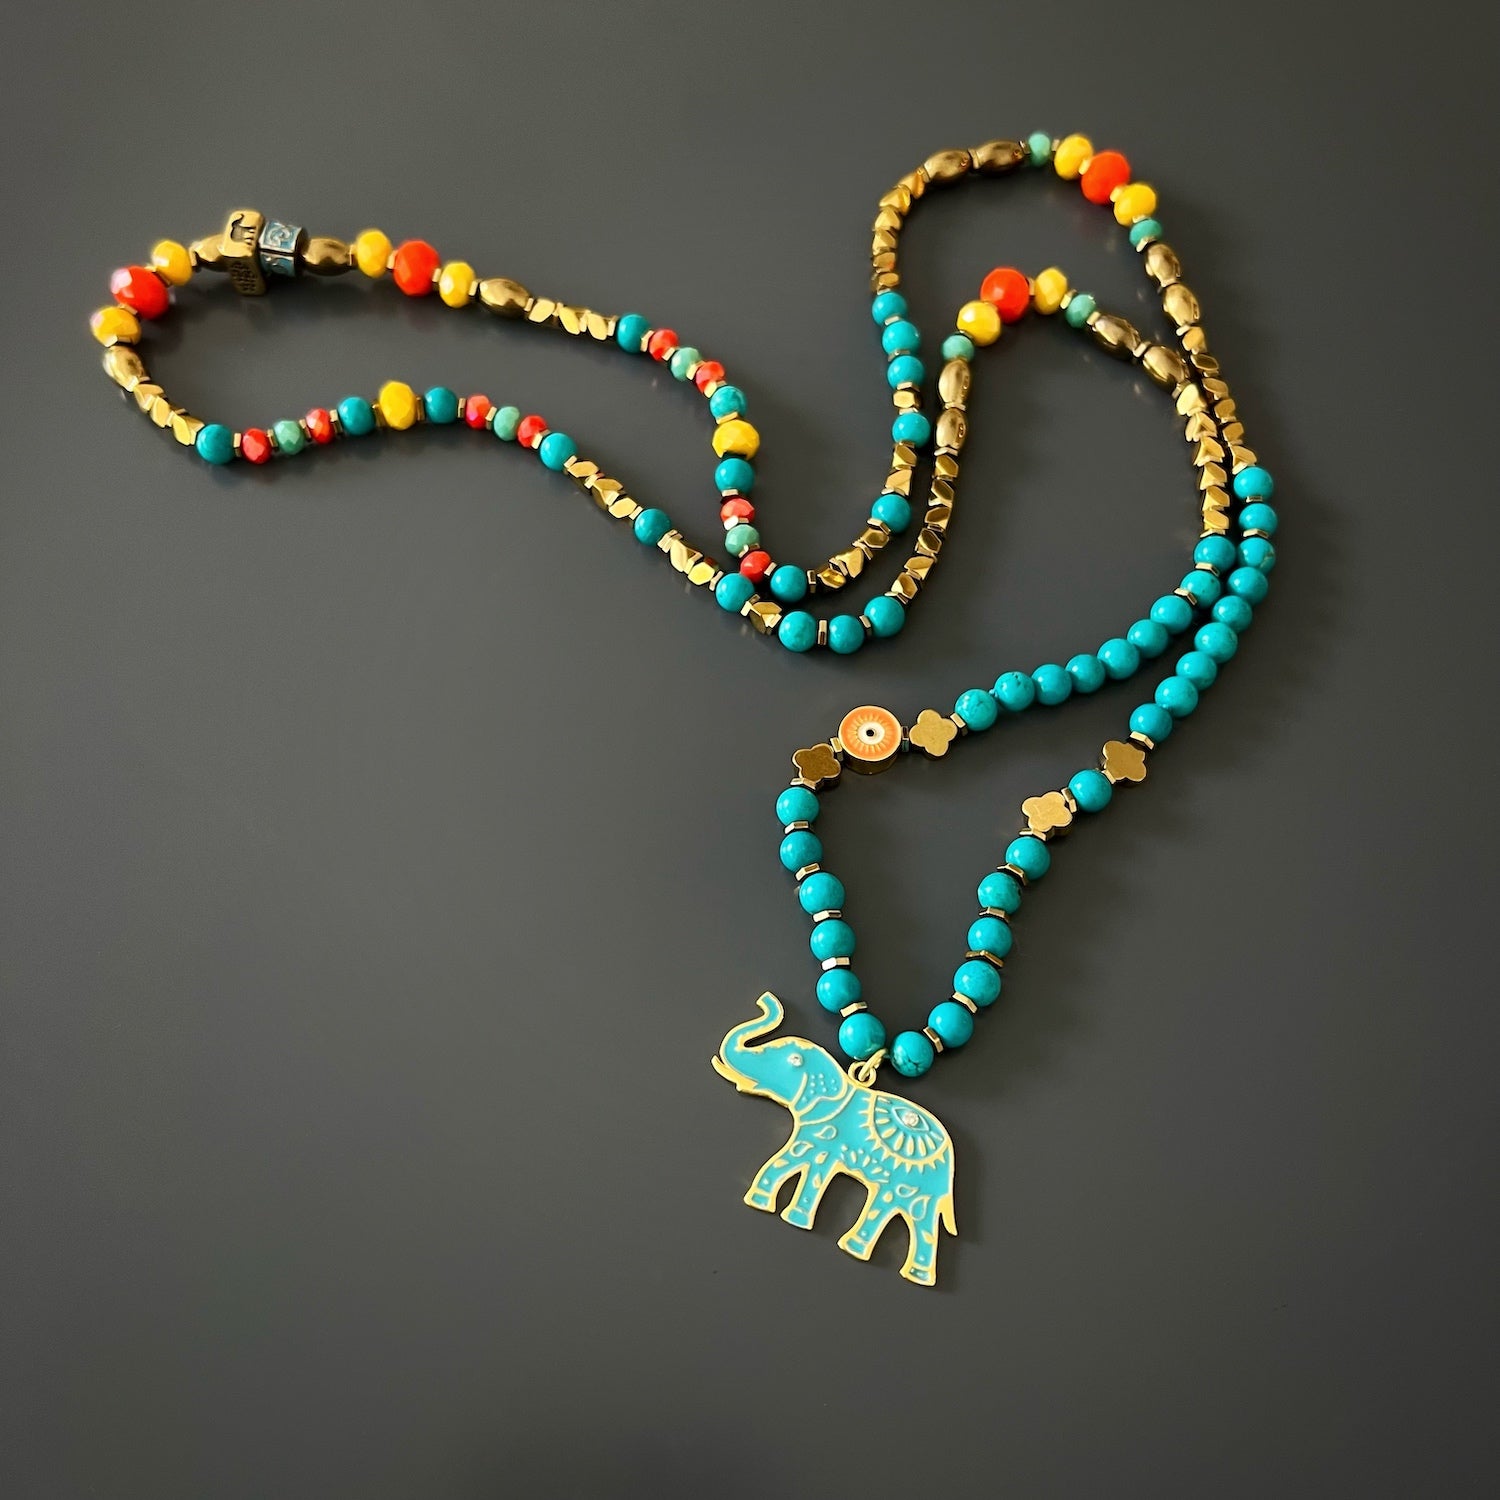 The Turquoise Blue Elephant Necklace, highlighting its unique combination of beads and symbols